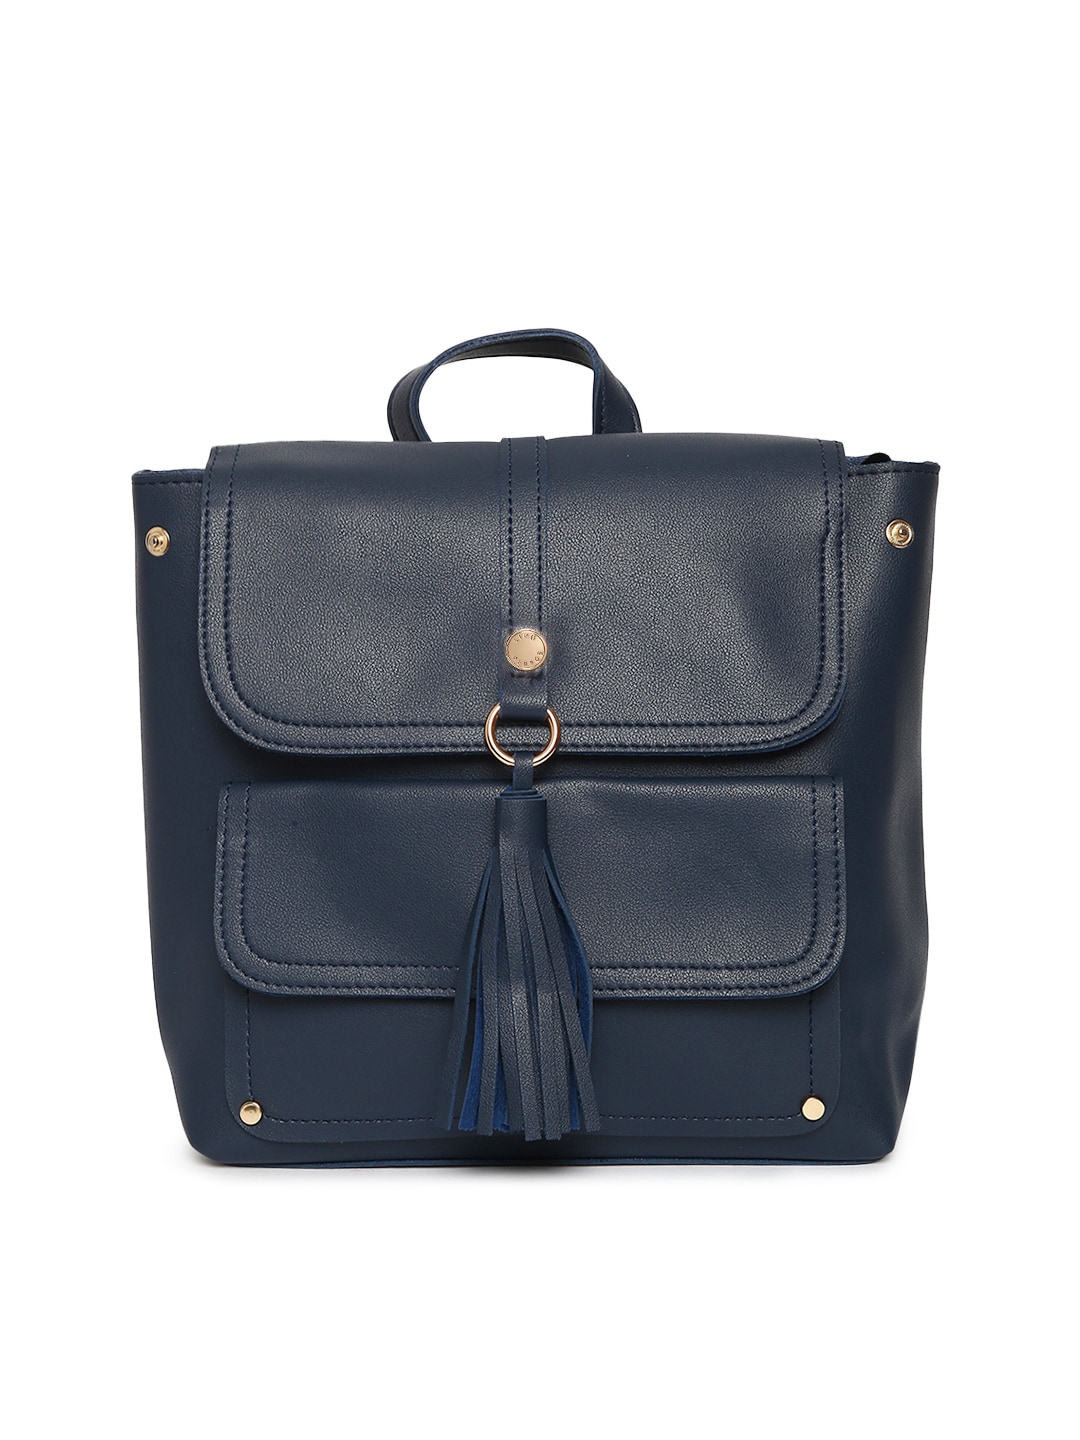 Lino Perros Women Navy Blue Solid Backpack Price in India